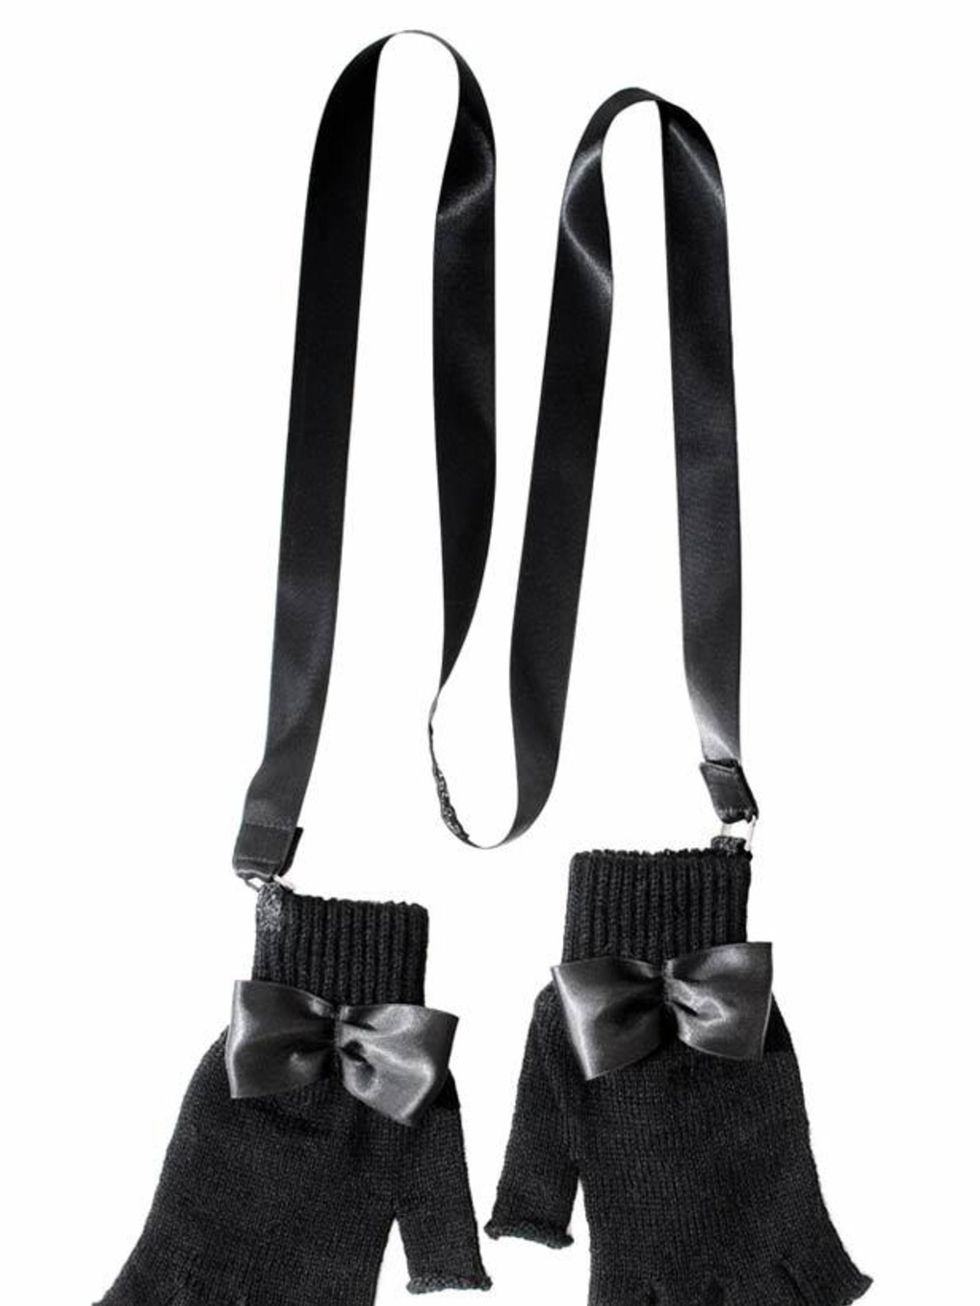 <p>Fingerless gloves with satin straps, £45, by <a href="http://www.bernstockspeirs.com/shop-category.aspx?2">Bernstock Speirs</a></p>